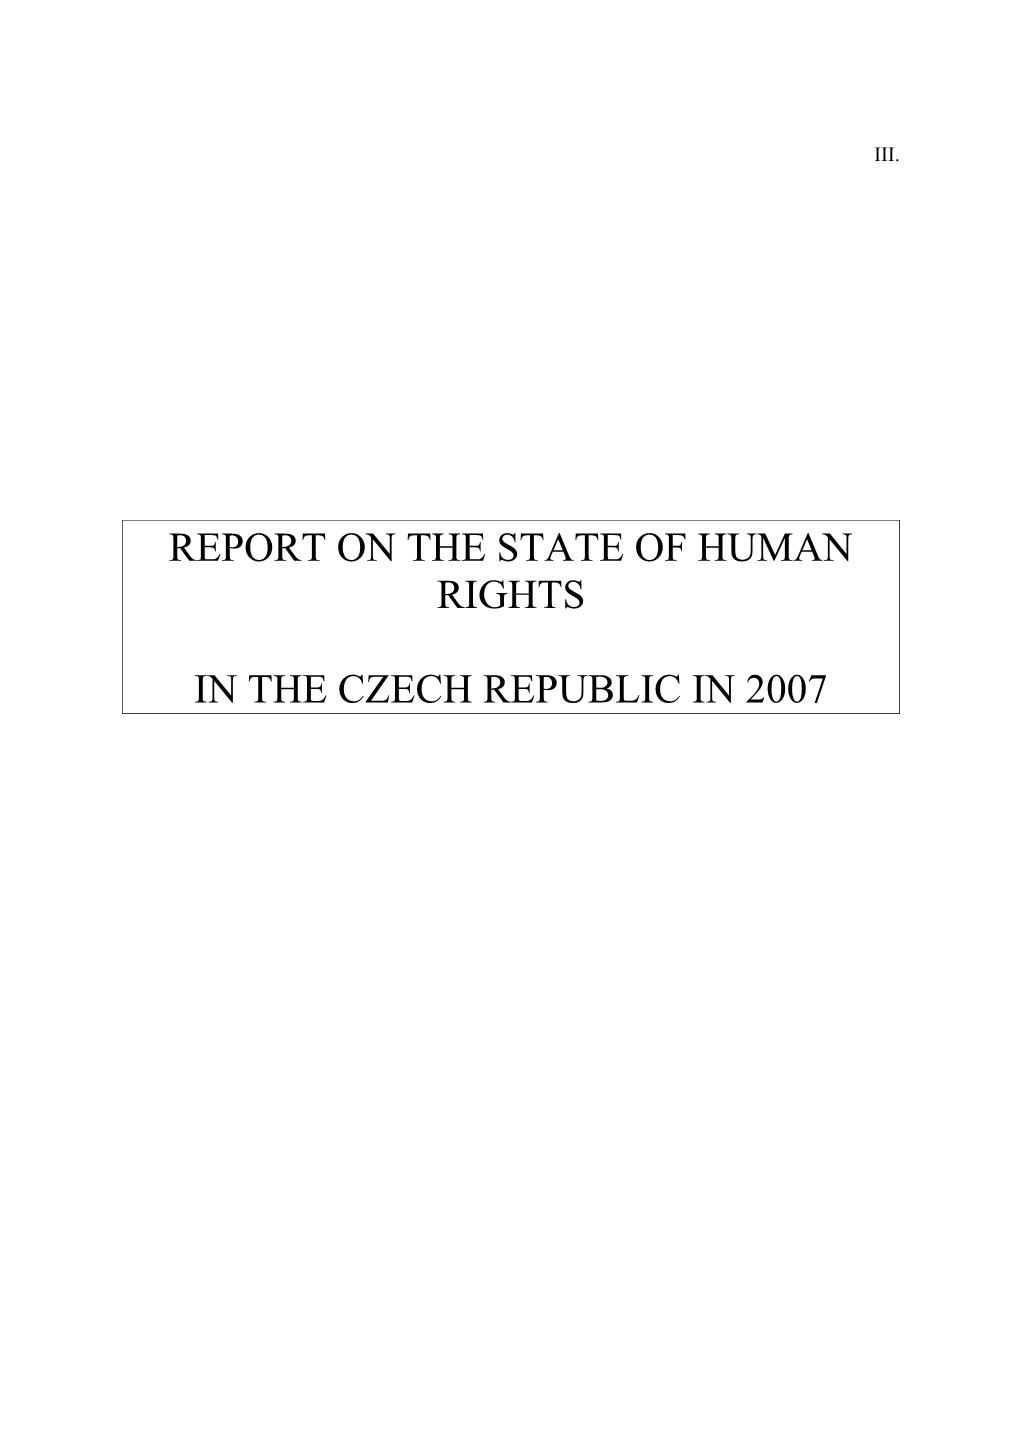 Report on the State of Human Rights